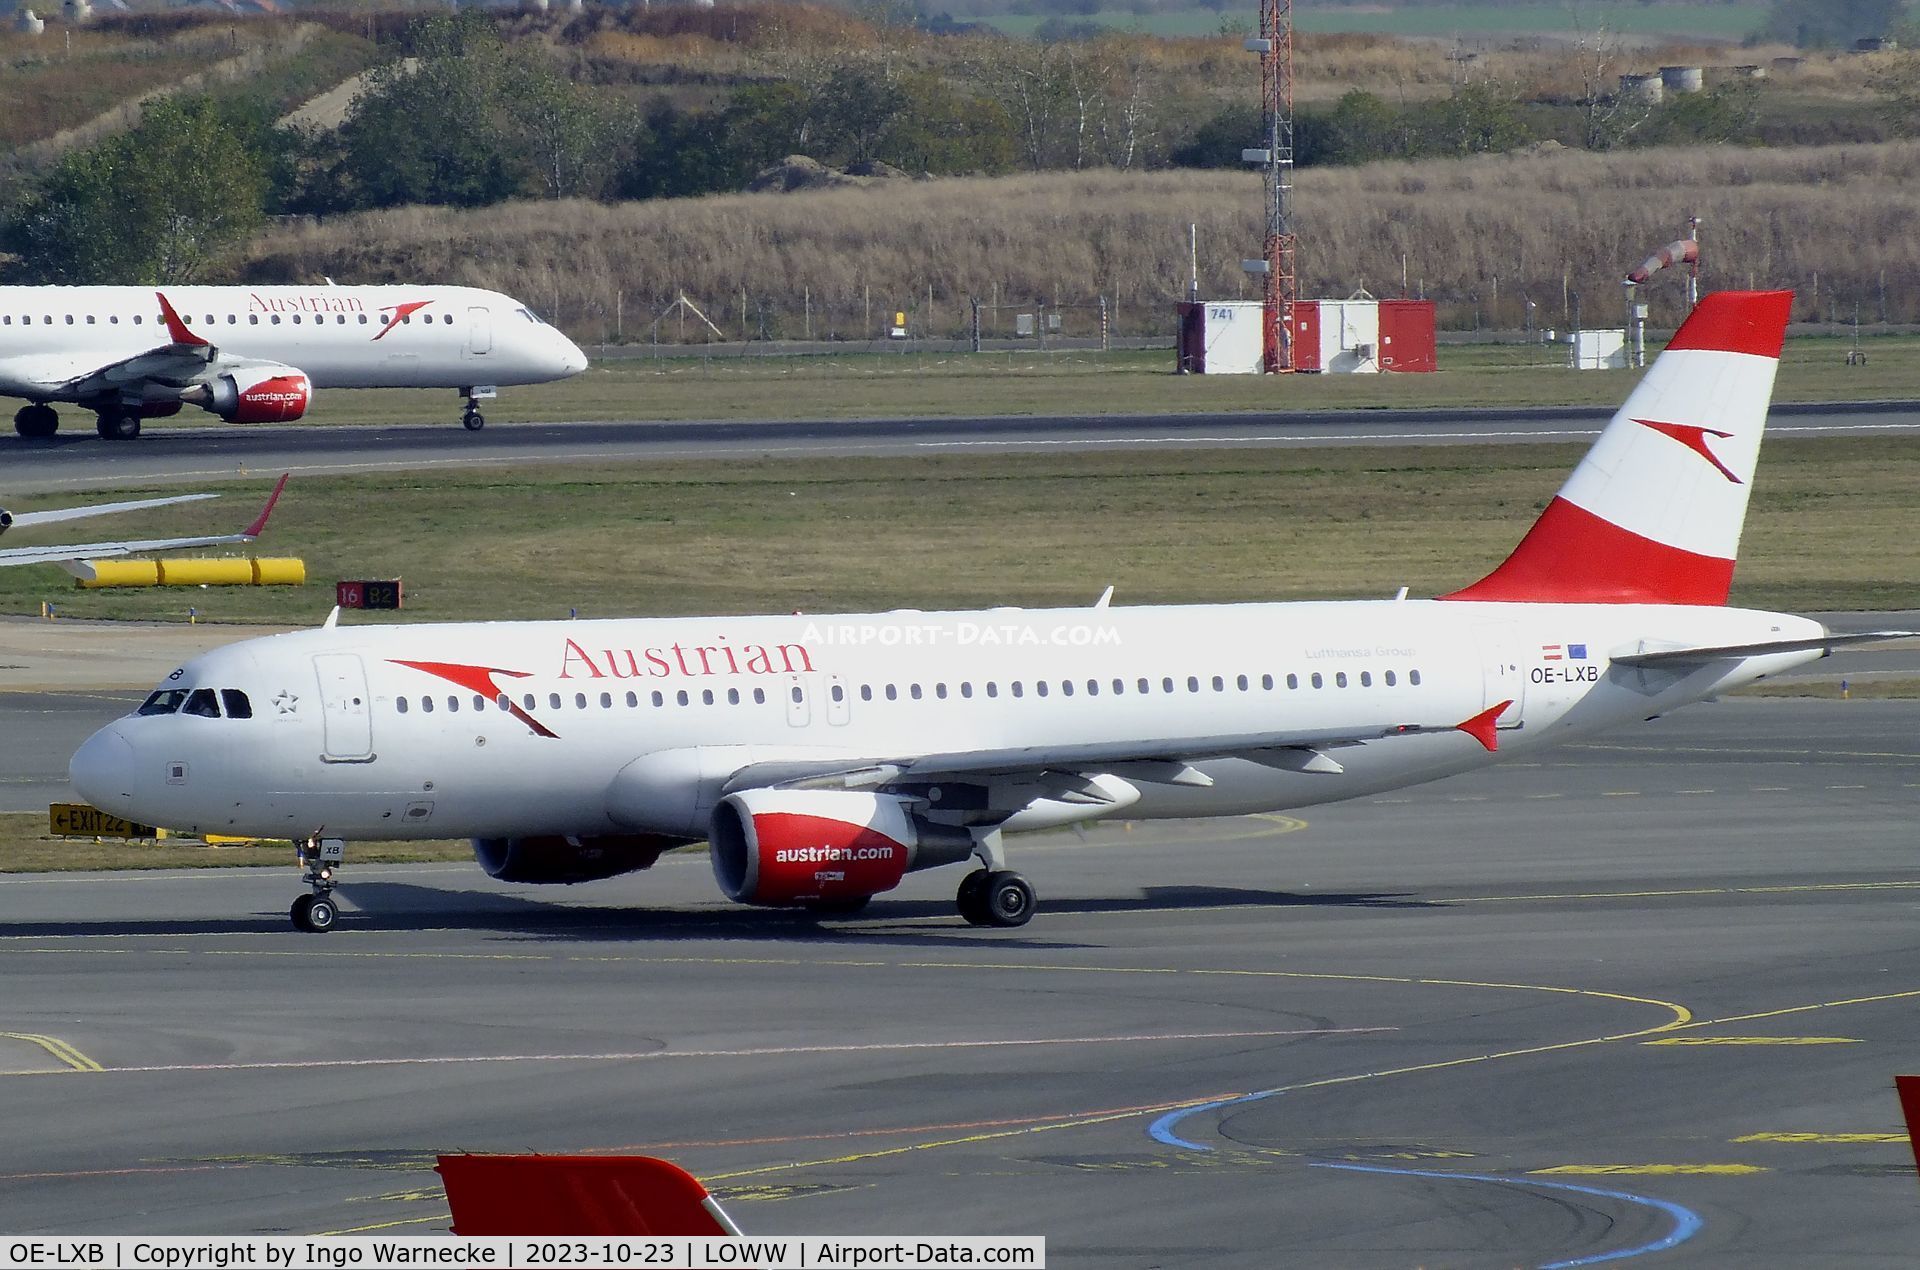 OE-LXB, 2008 Airbus A320-216 C/N 3482, Airbus A320-216 of Austrian Airlines at Wien-Schwechat airport